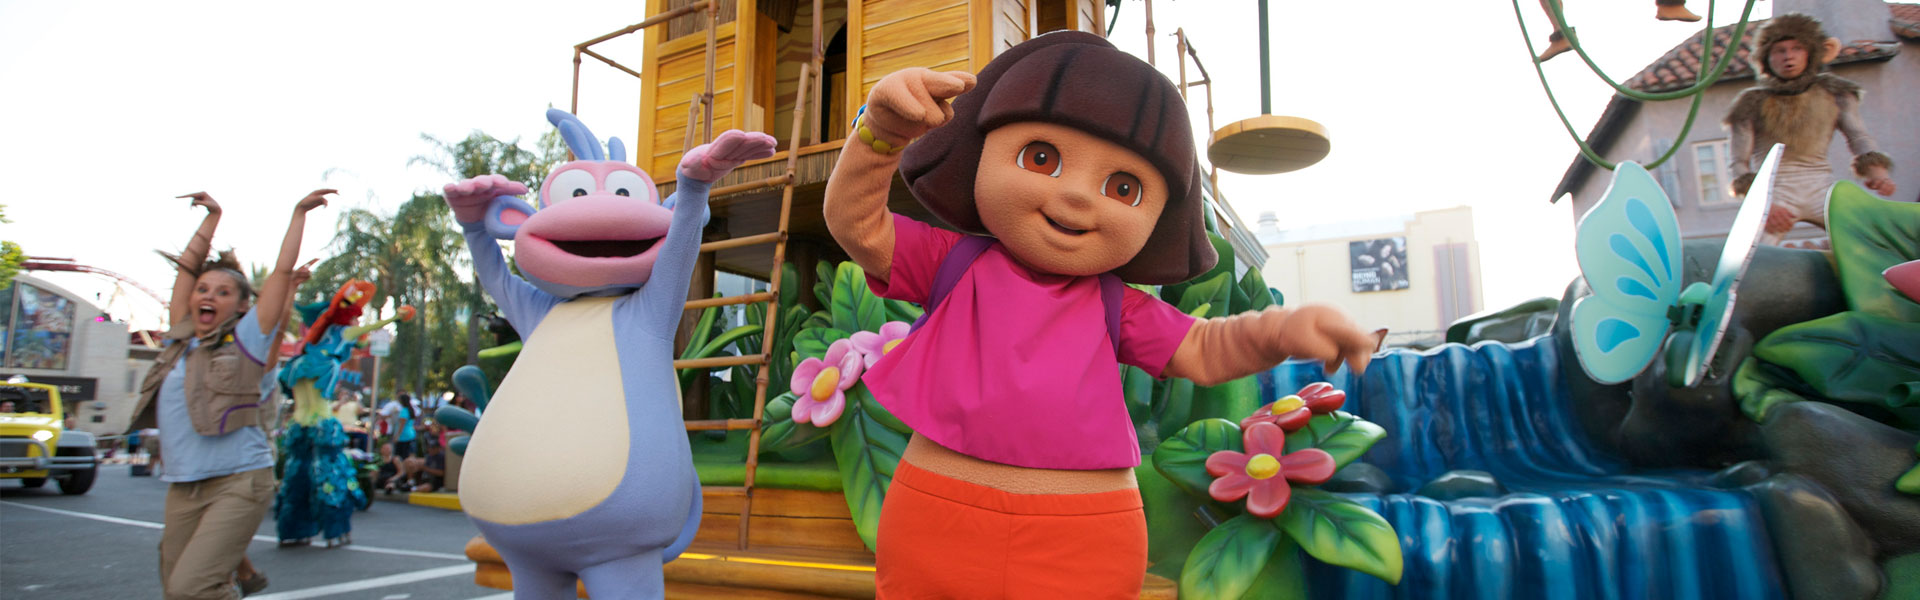 Dora the Explorer and Boots dancing during a parade